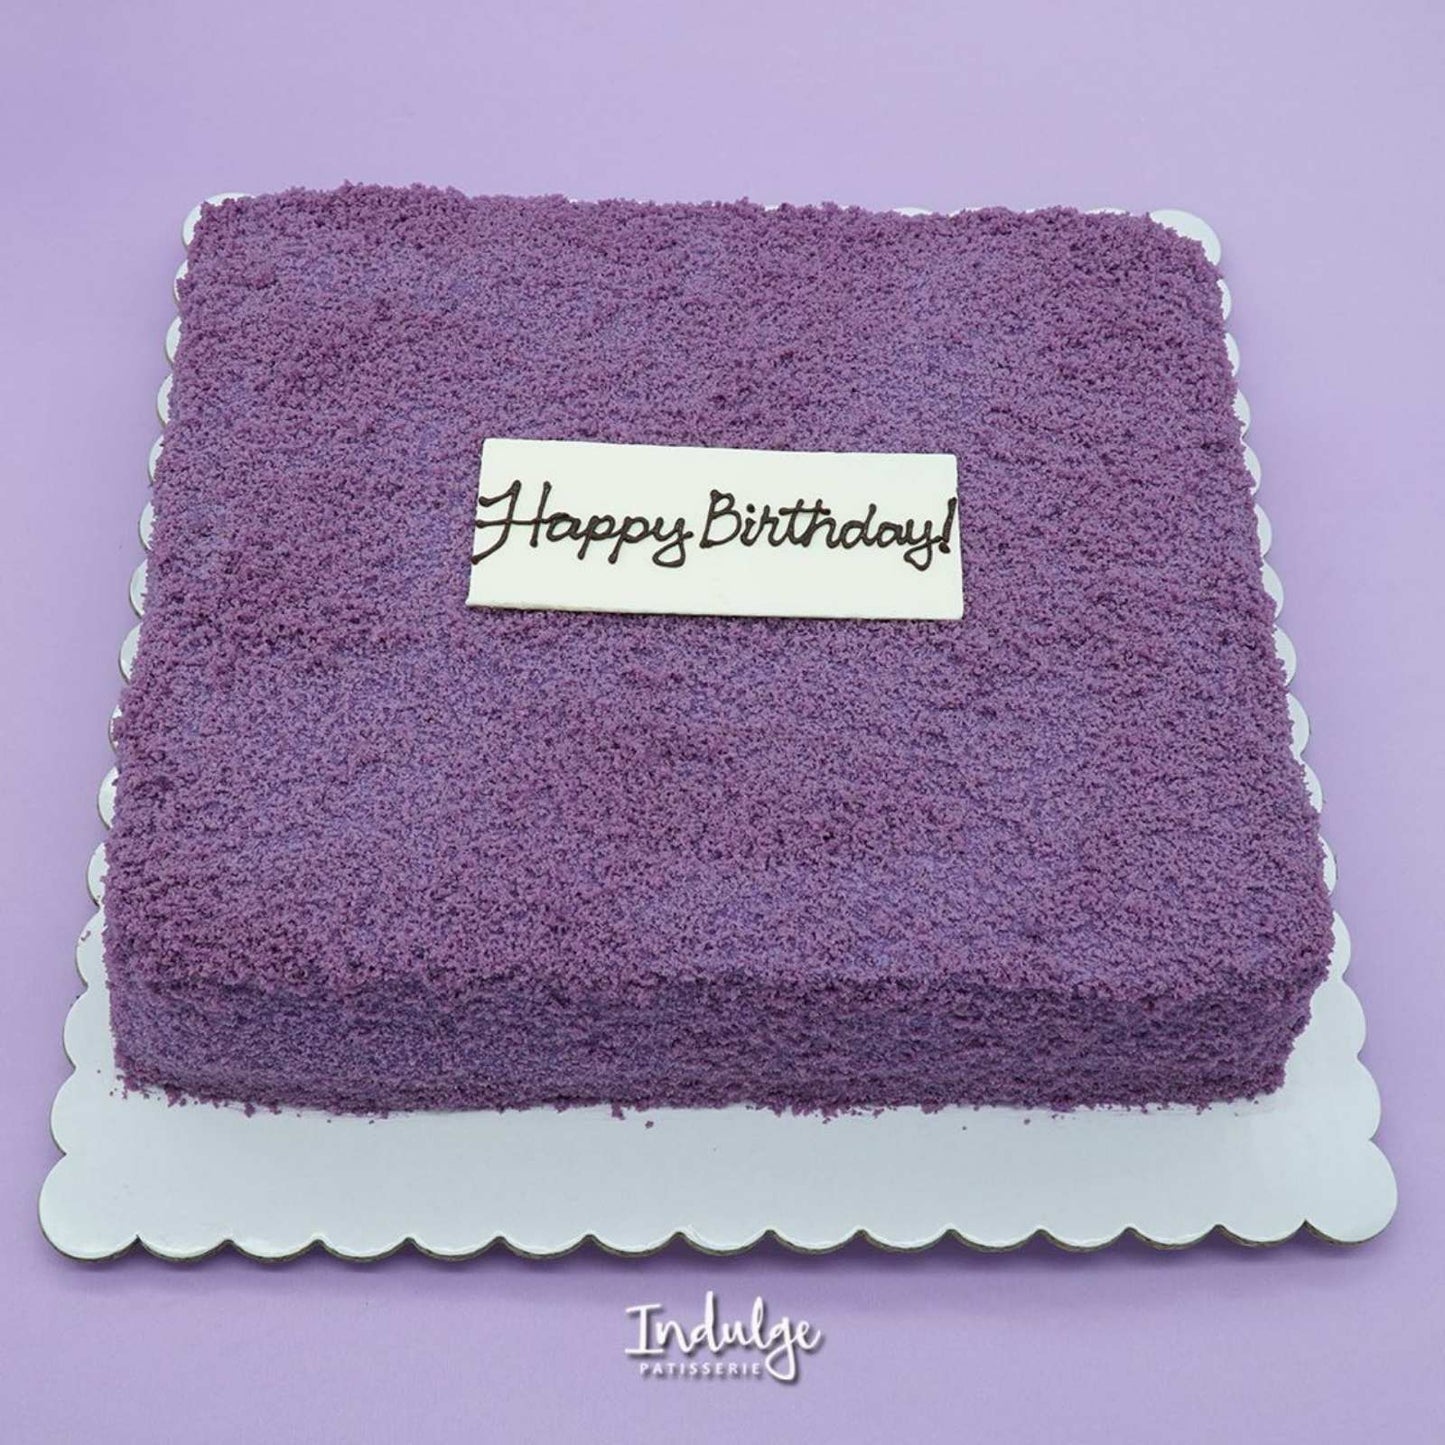 Ube Cake (10 by 12 inches Rectangle)